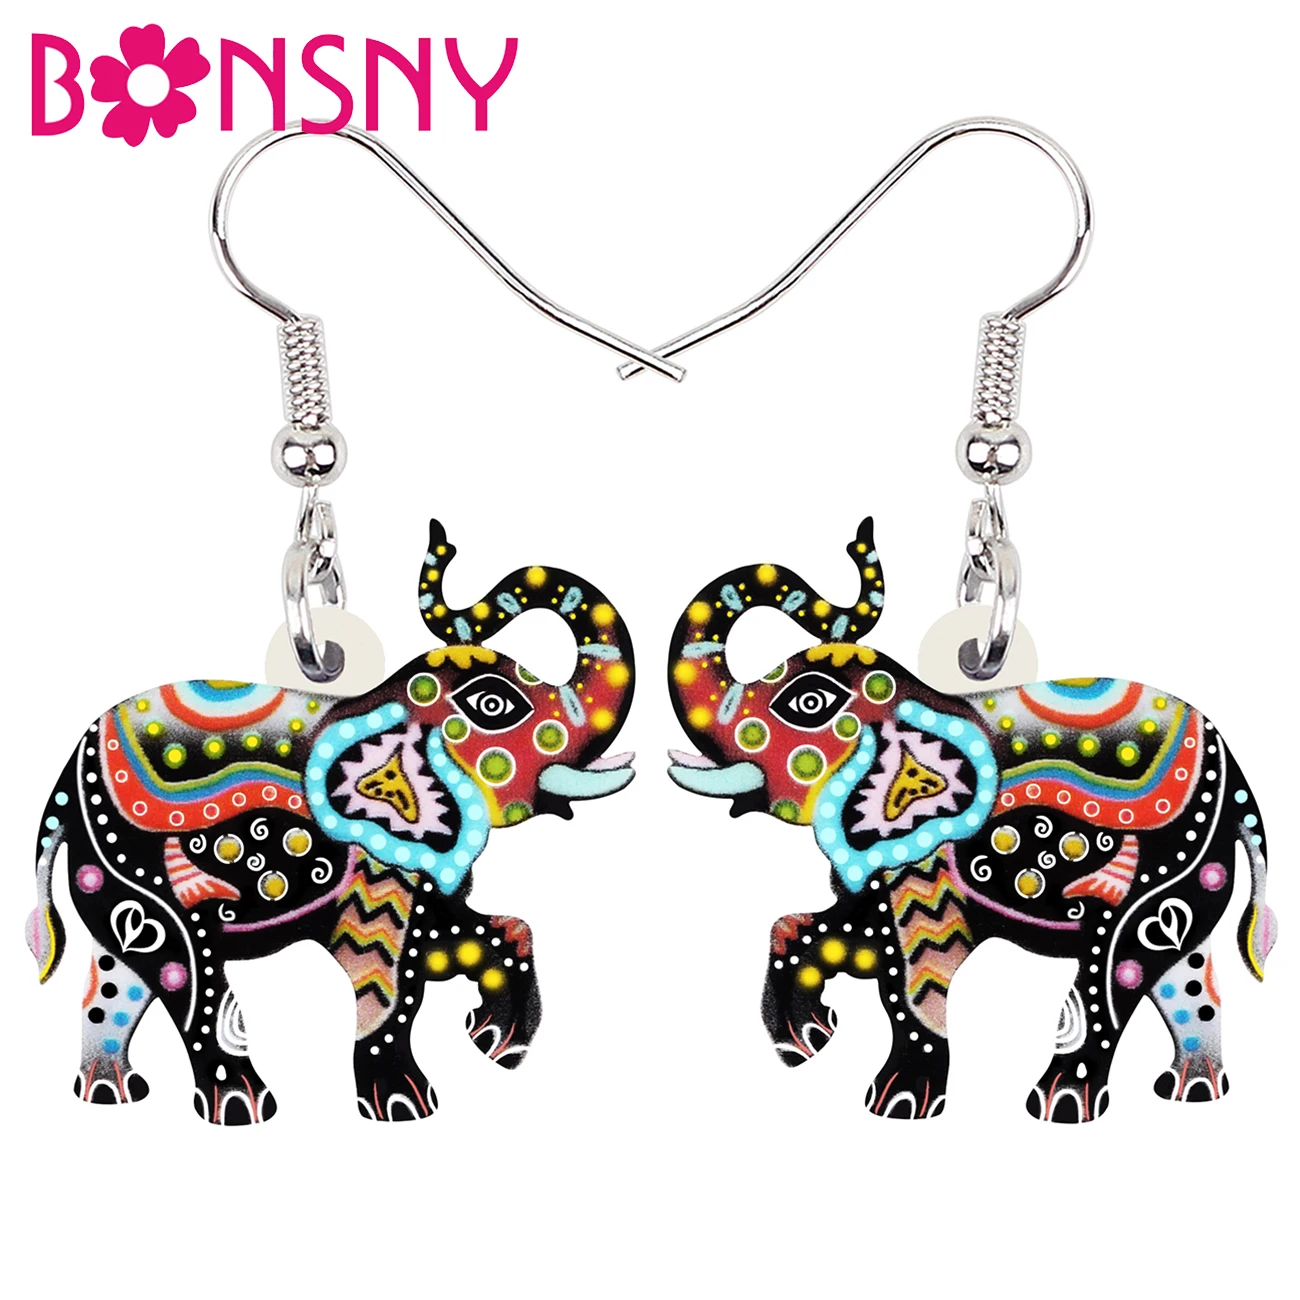 BONSNY Acrylic Africa Vintage Totem Long Nose Elephant Earrings Long Drop Dangle Fashion Animals Gifts Jewelry For Girl Women